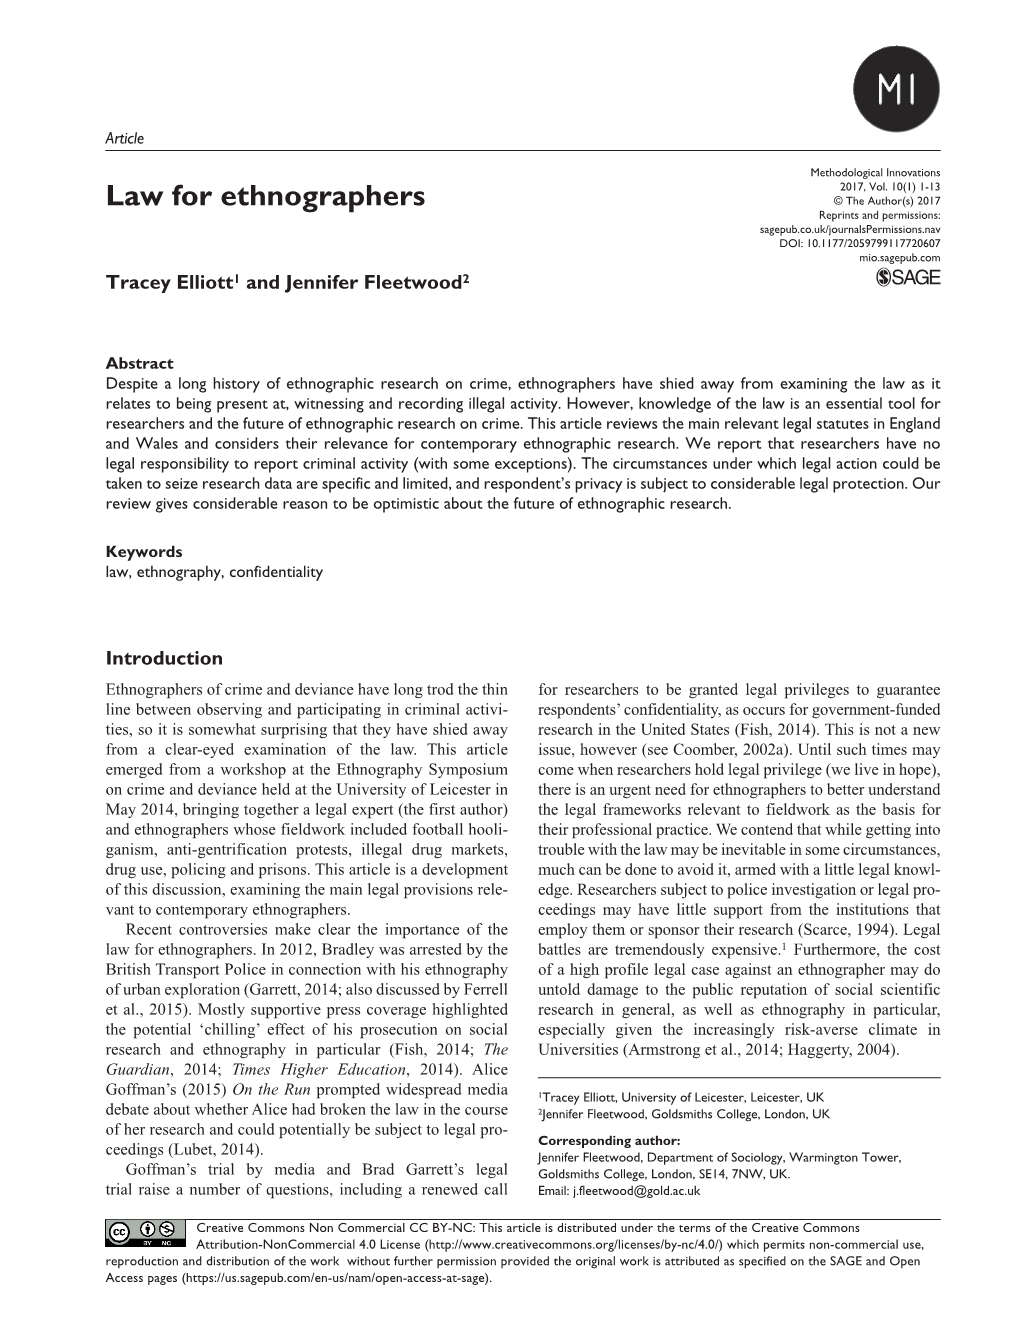 Law for Ethnographers